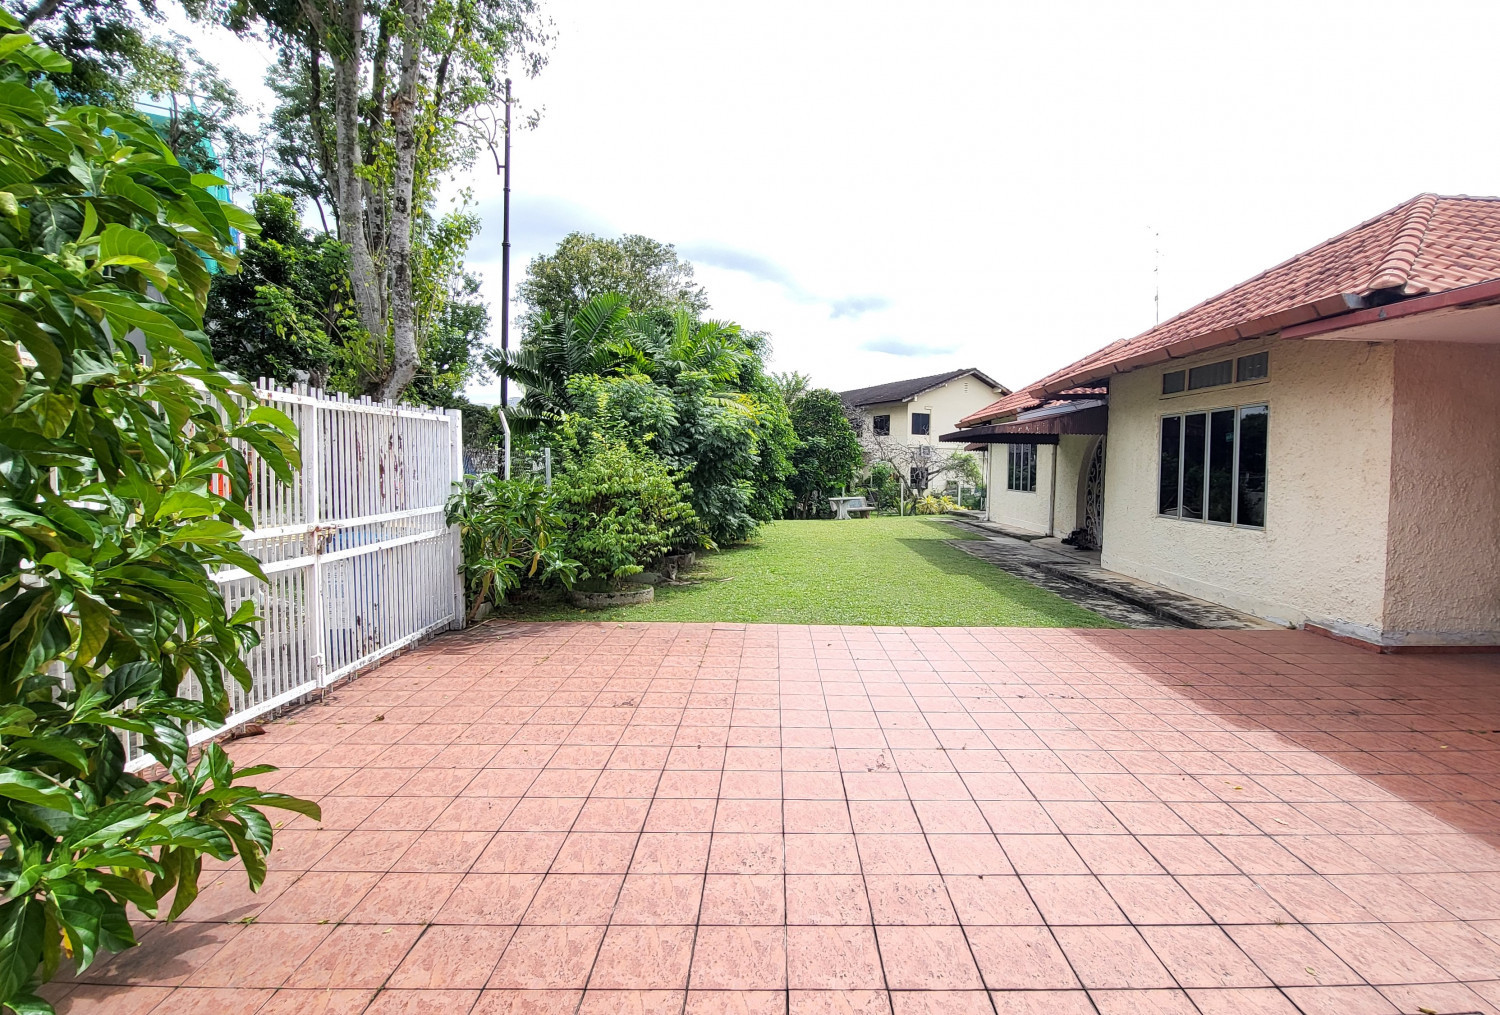 Freehold bungalow in Braddell Heights for sale at $23 mil - Property News